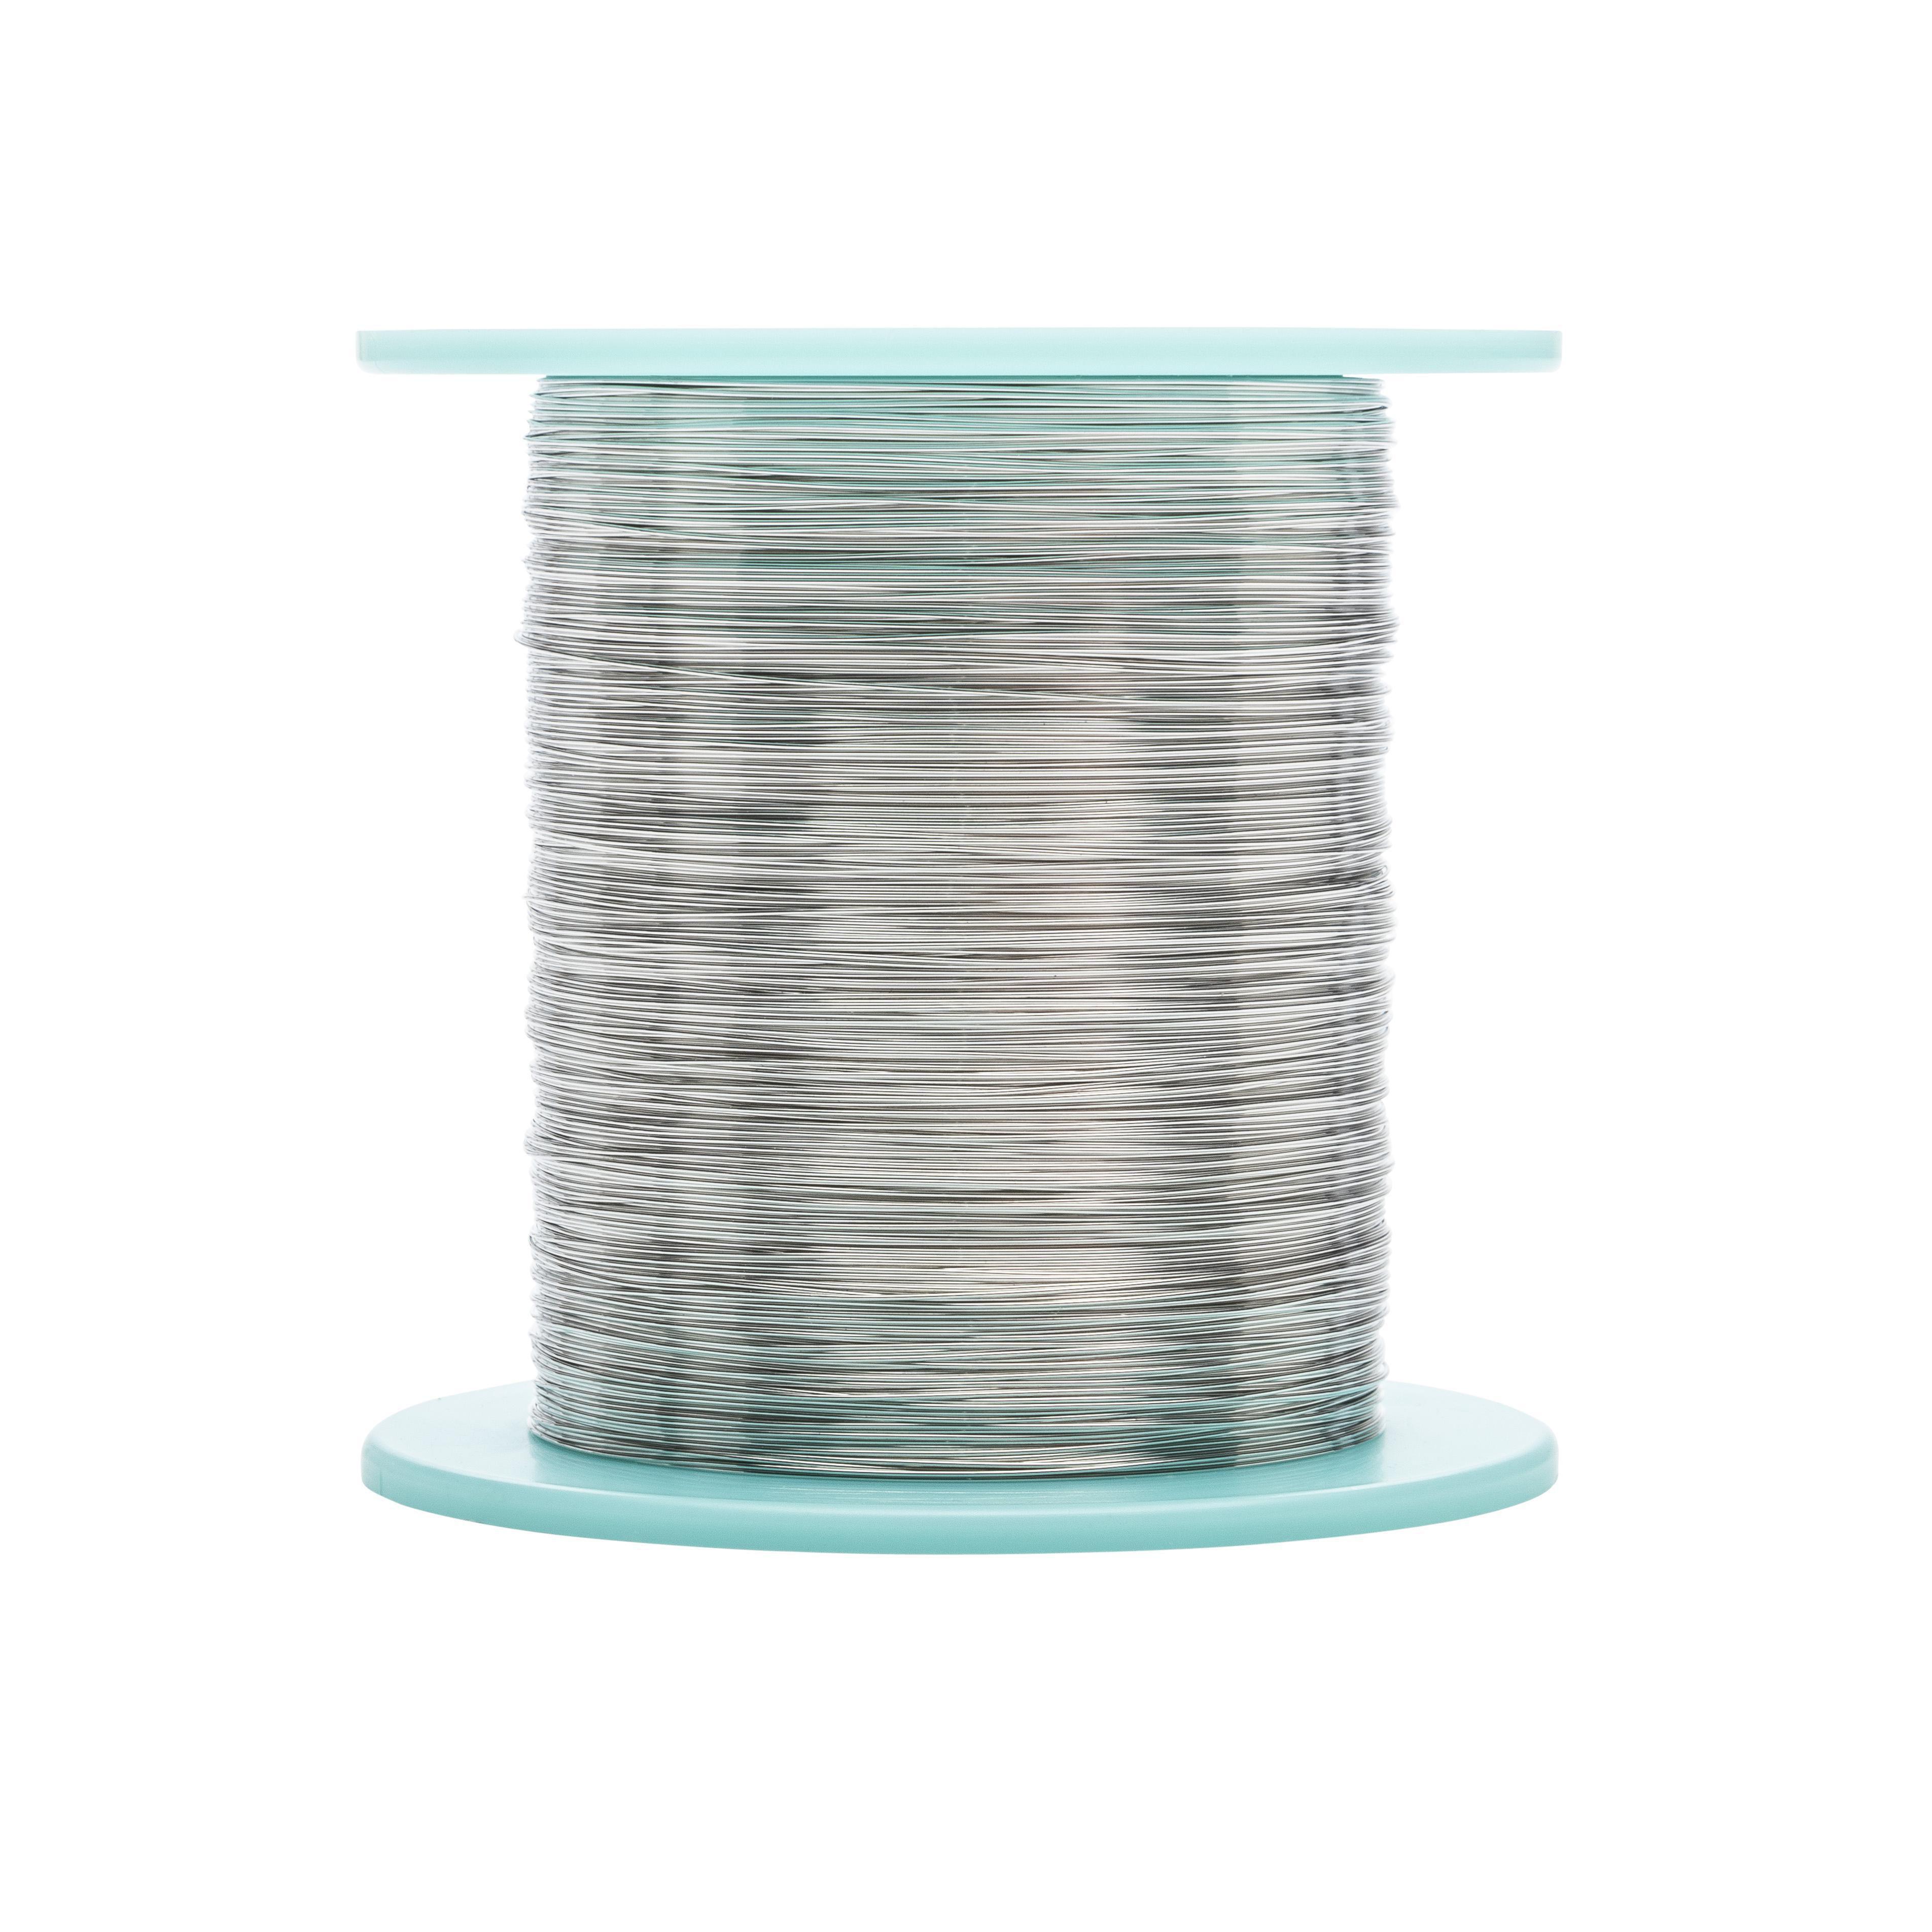 T0051388399 | WSW SAC L0 solder wire 0.3mm, 100g Sn3.0Ag0.5Cu